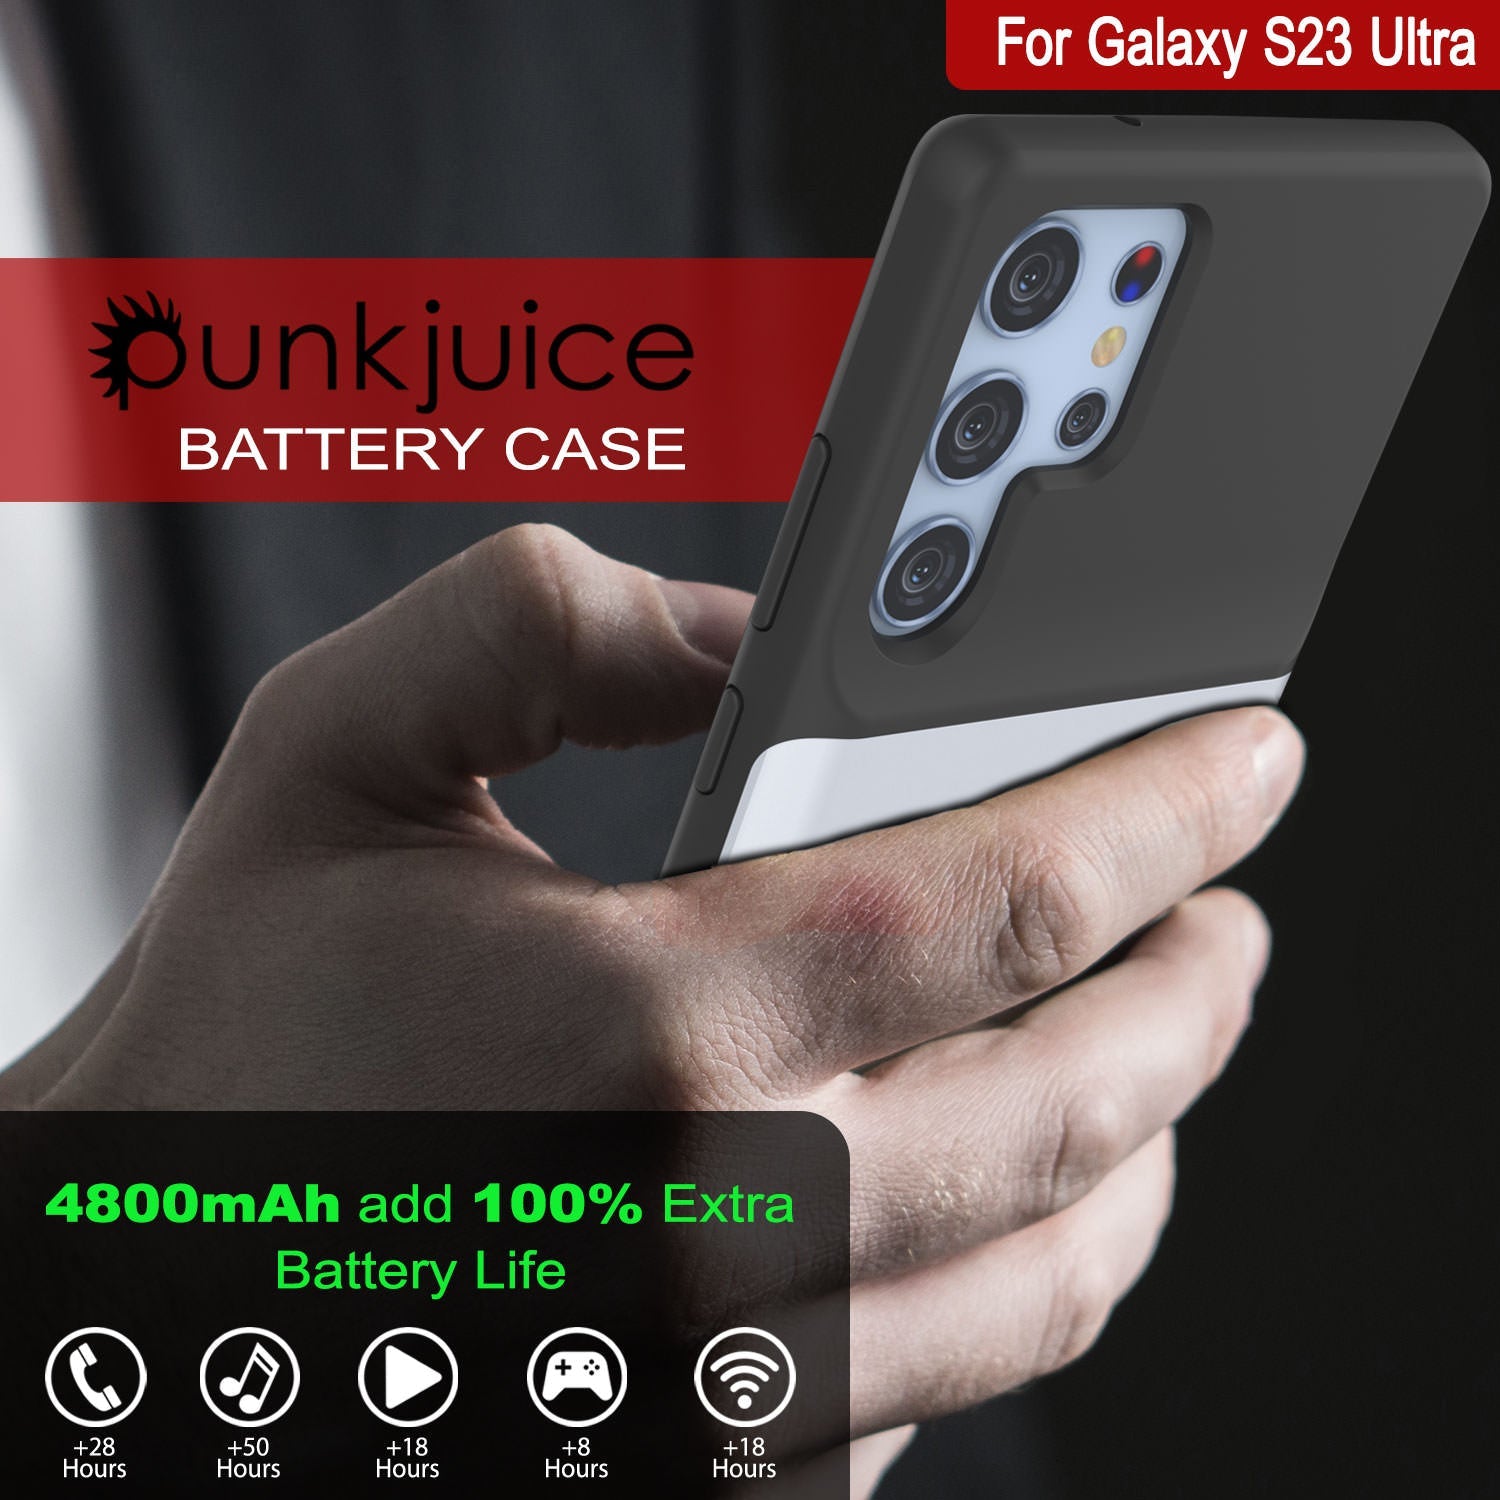 PunkJuice S23 Ultra Battery Case White - Portable Charging Power Juice Bank with 4800mAh